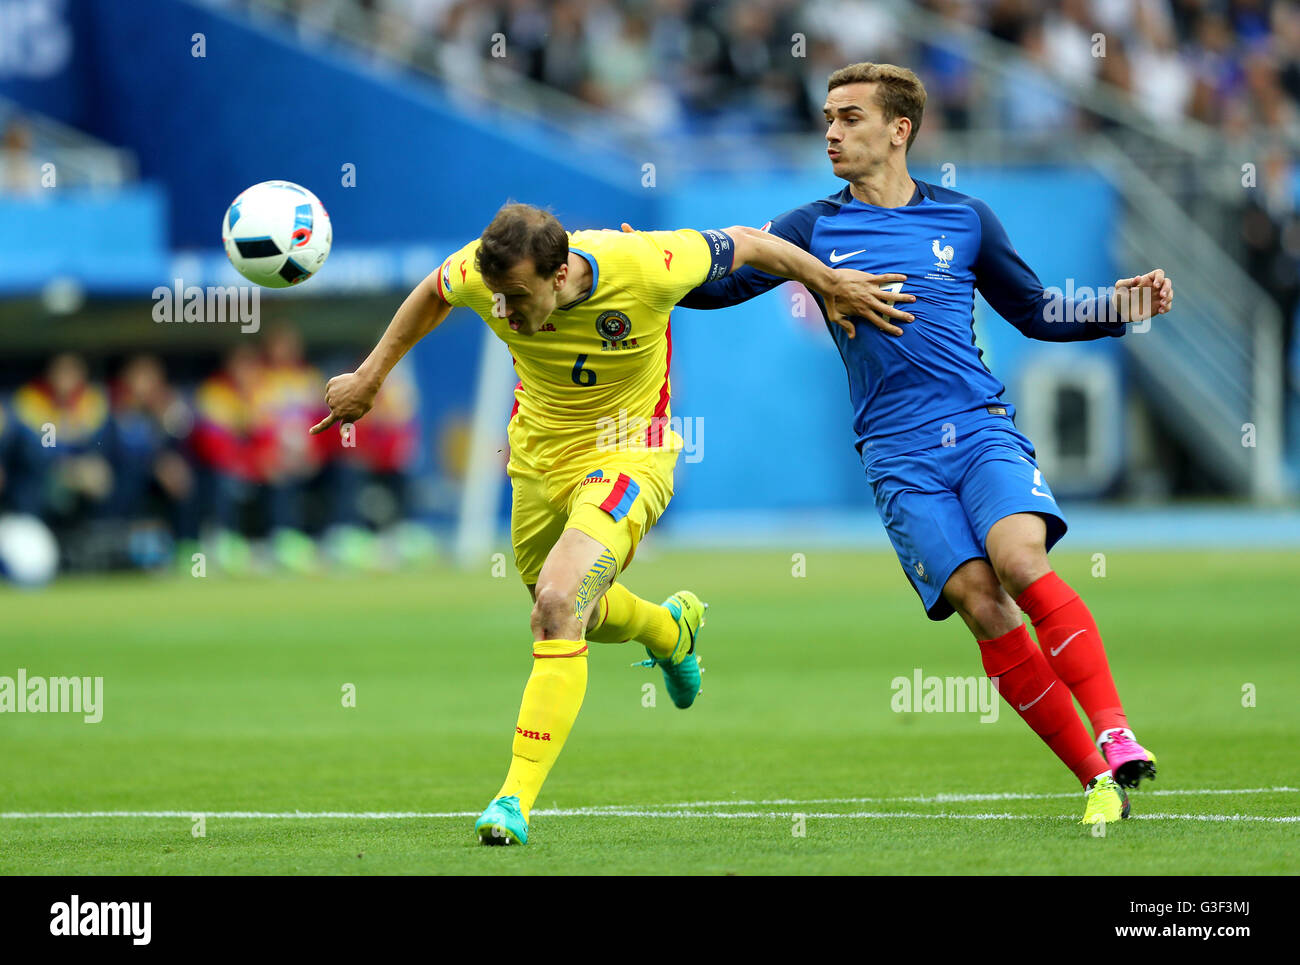 Romania's Vlad Chiriches (left) and France's Antoine Griezmann battle for the ball during the UEFA Euro 2016, Group A match at the Stade de France, Paris. Stock Photo